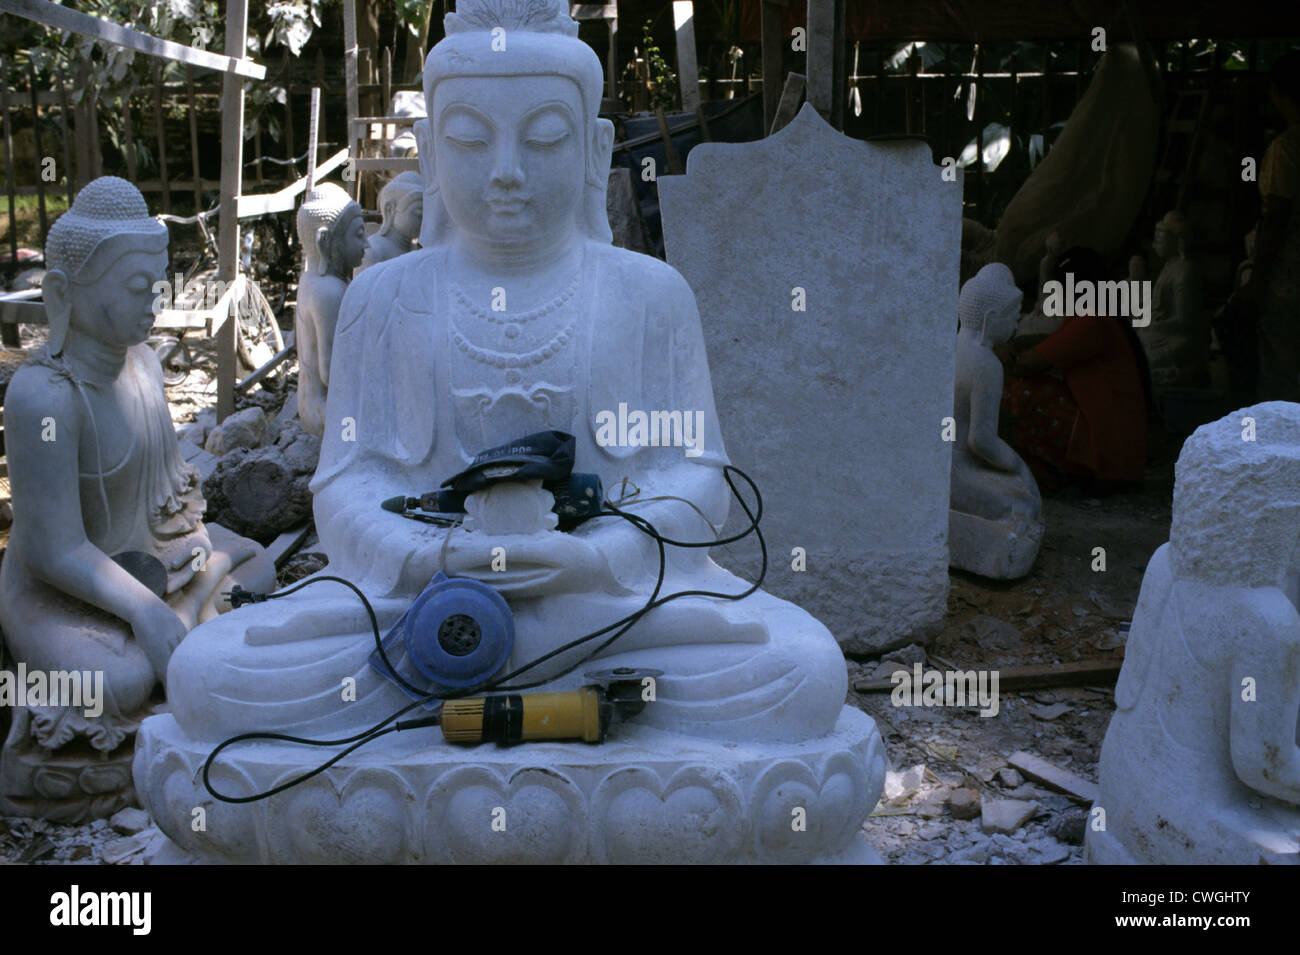 Not of finished marble Buddha tool in lap Stock Photo